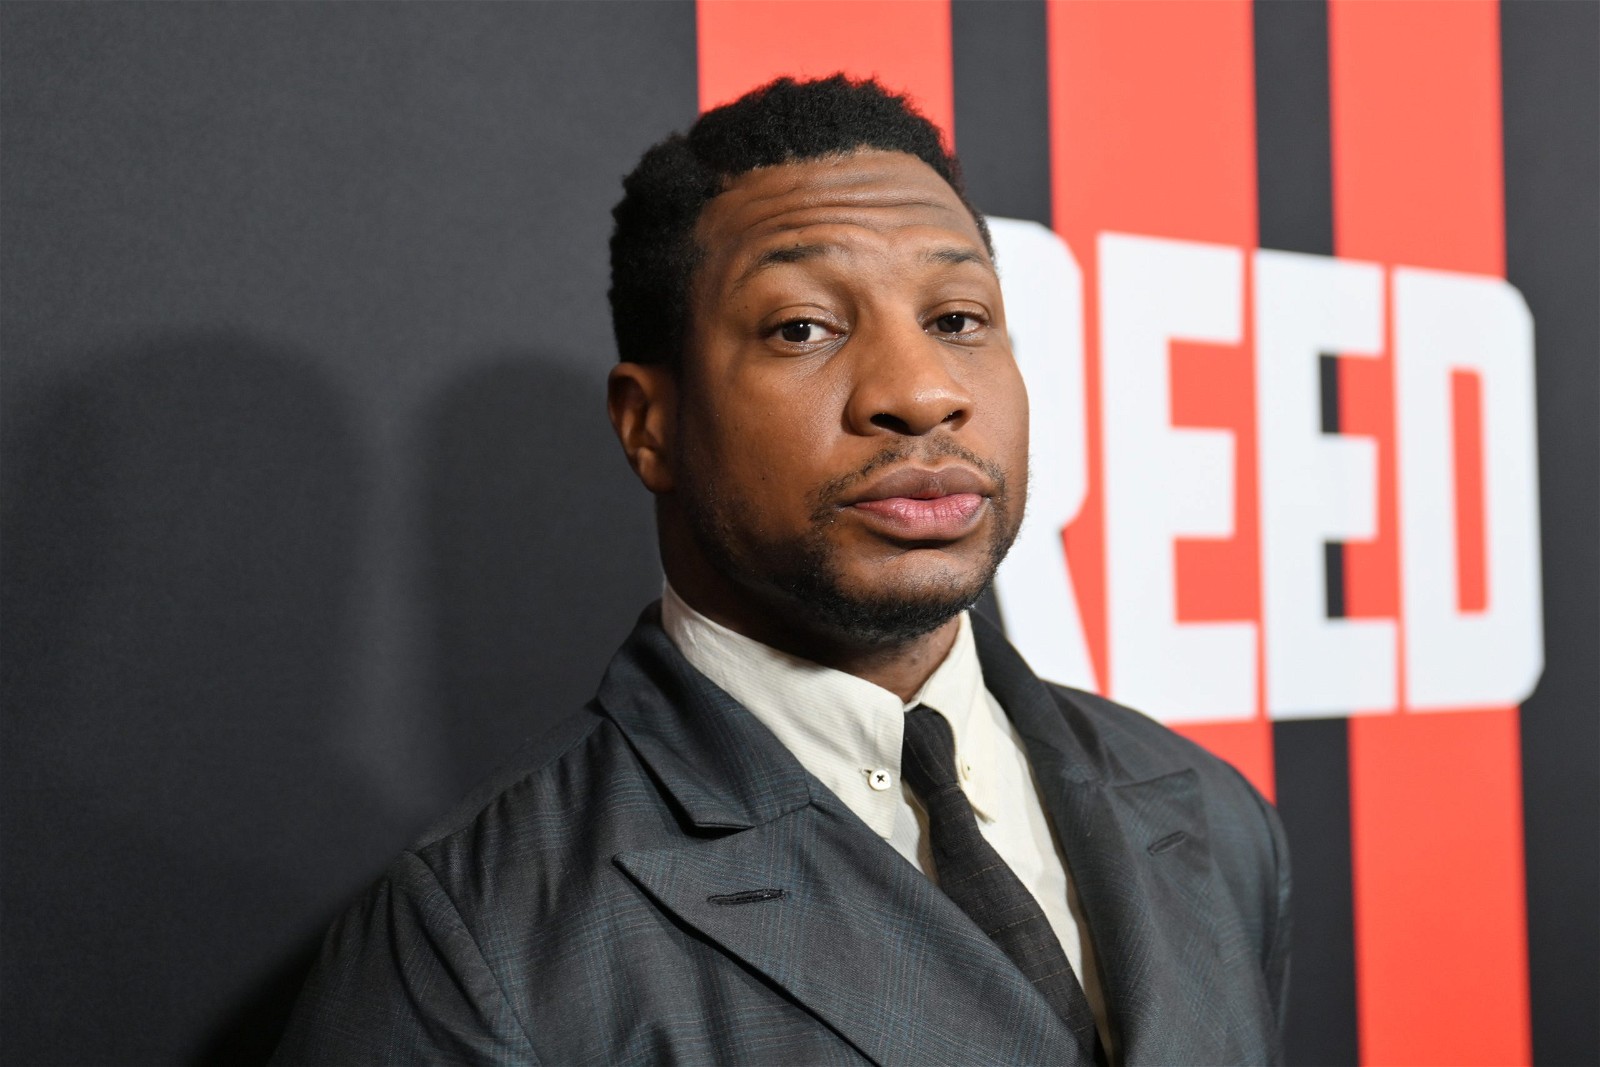 Jonathan Majors is a renowned Marvel actor